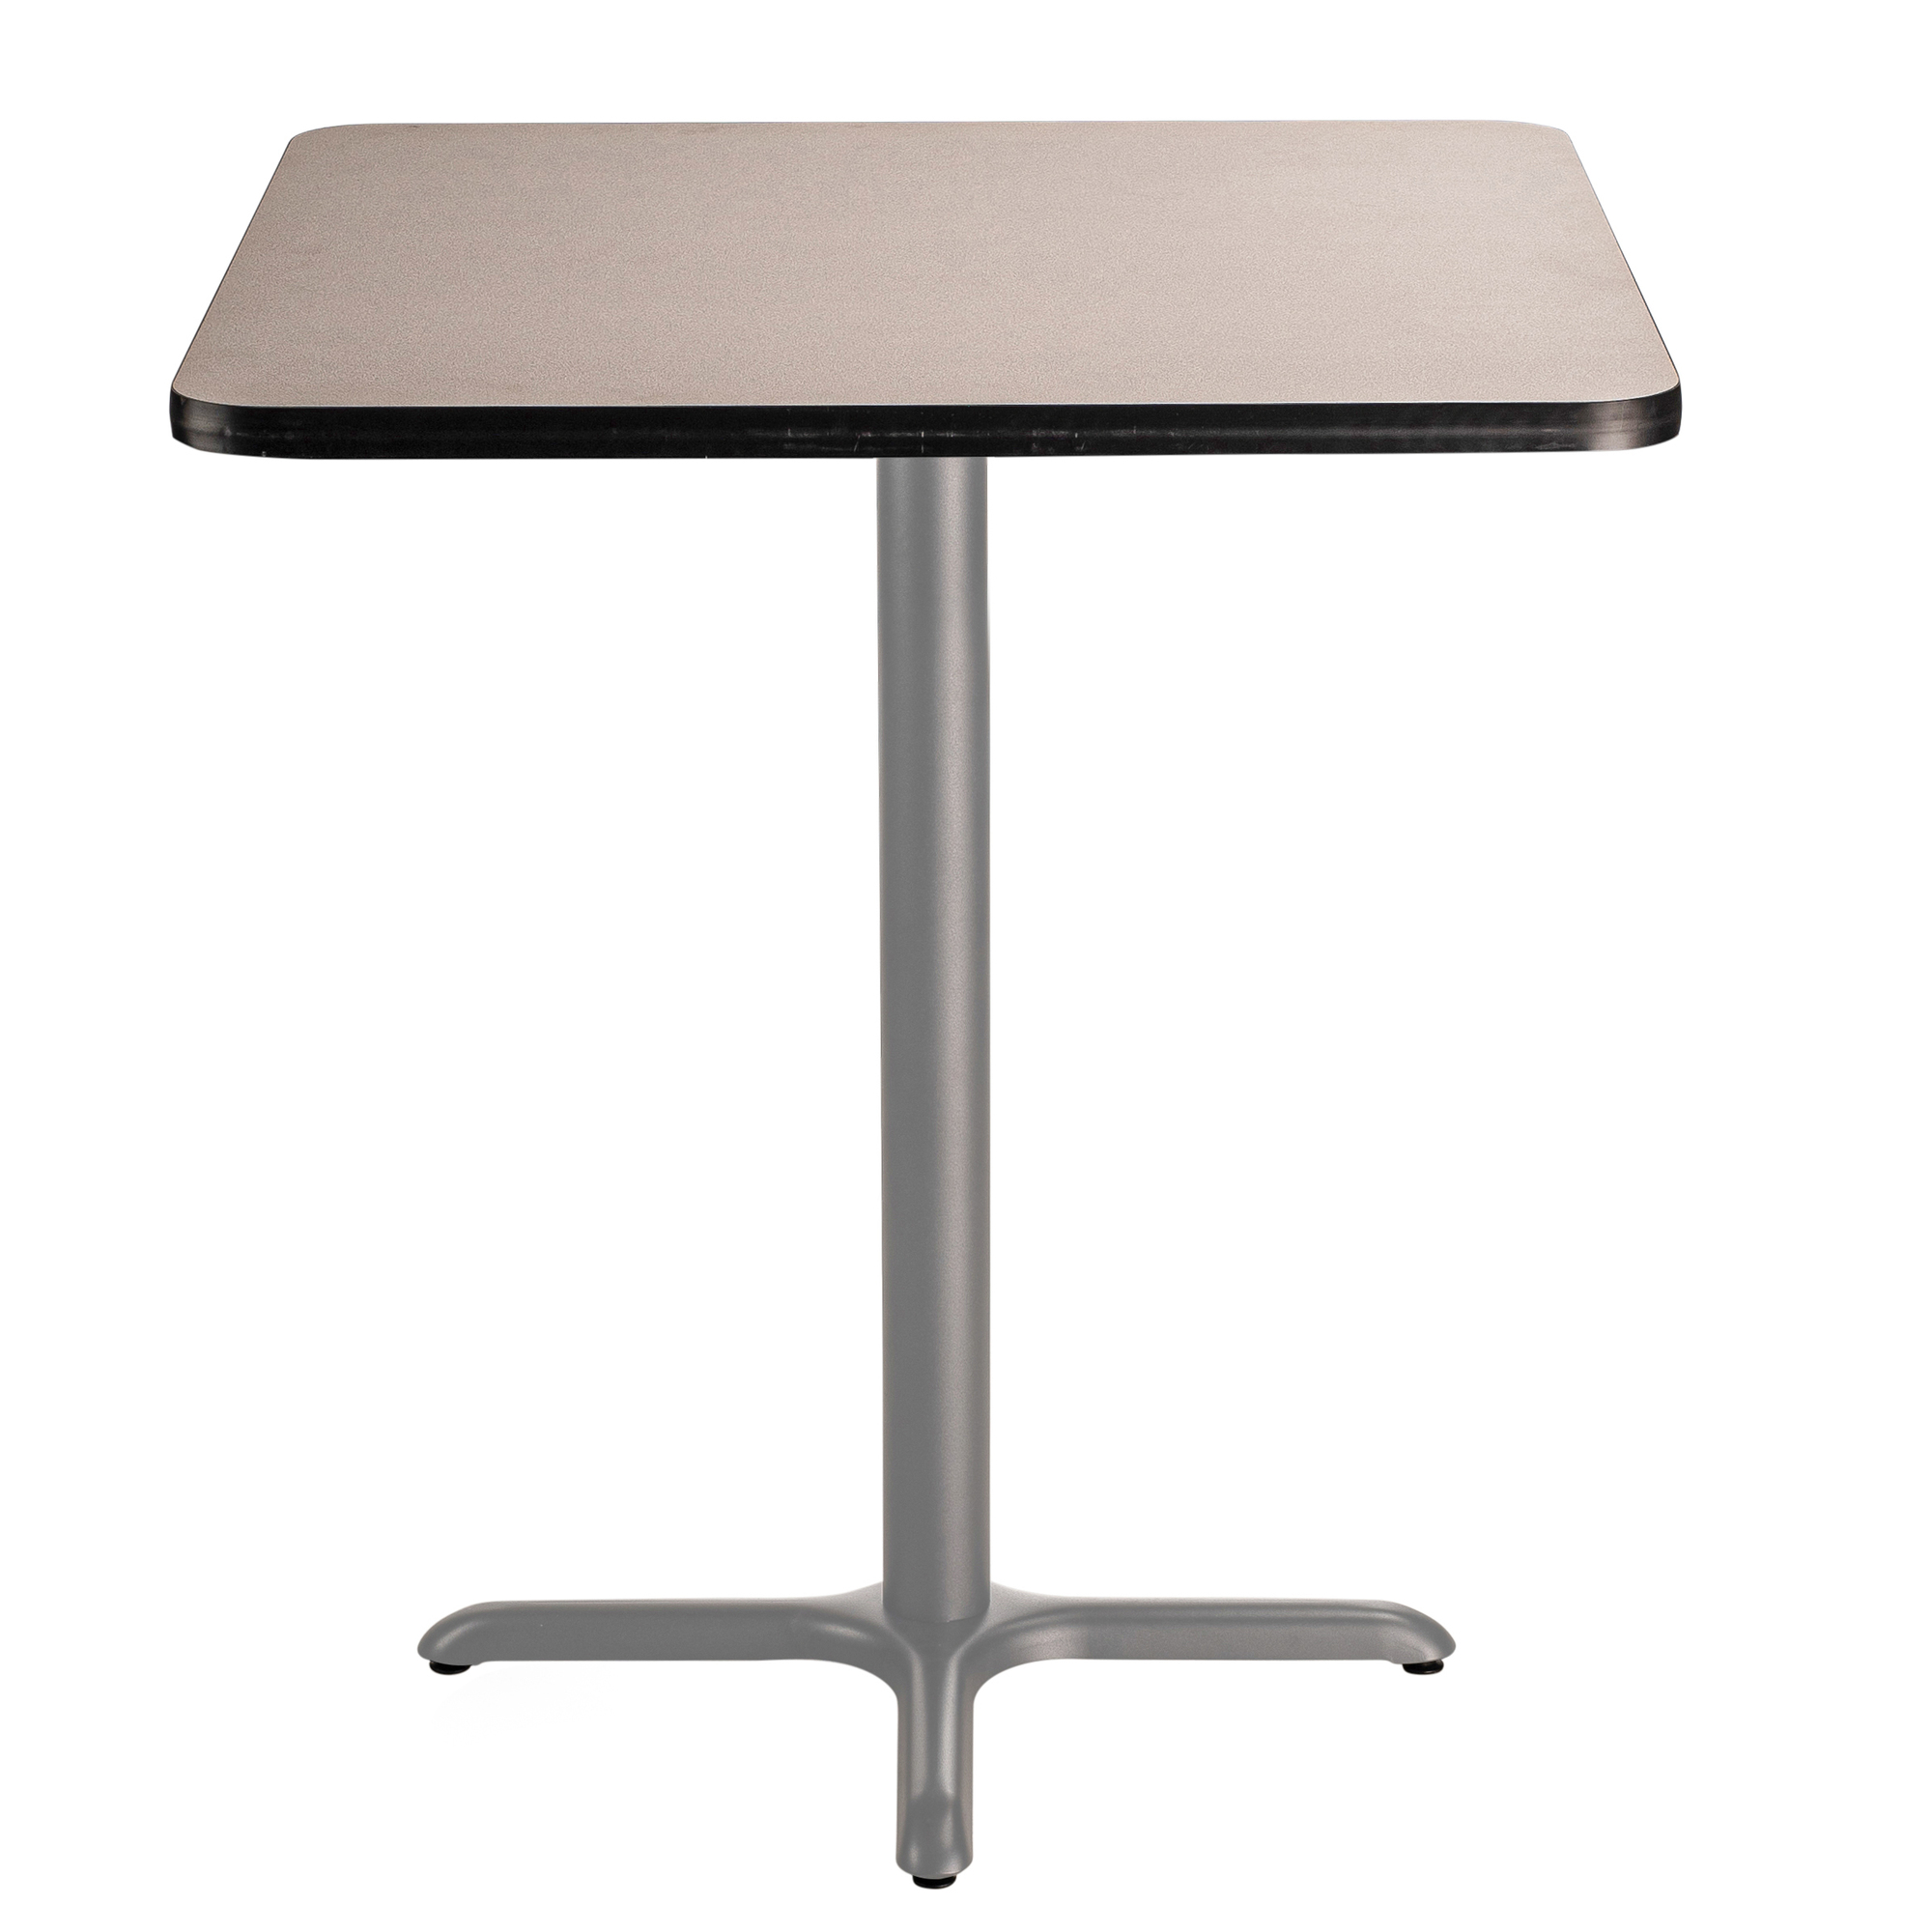 "National Public Seating, Cafe Table, 36x36x42 Square ""X"" Base, Height 42 in, Model CTG33636XBPBTMGY"